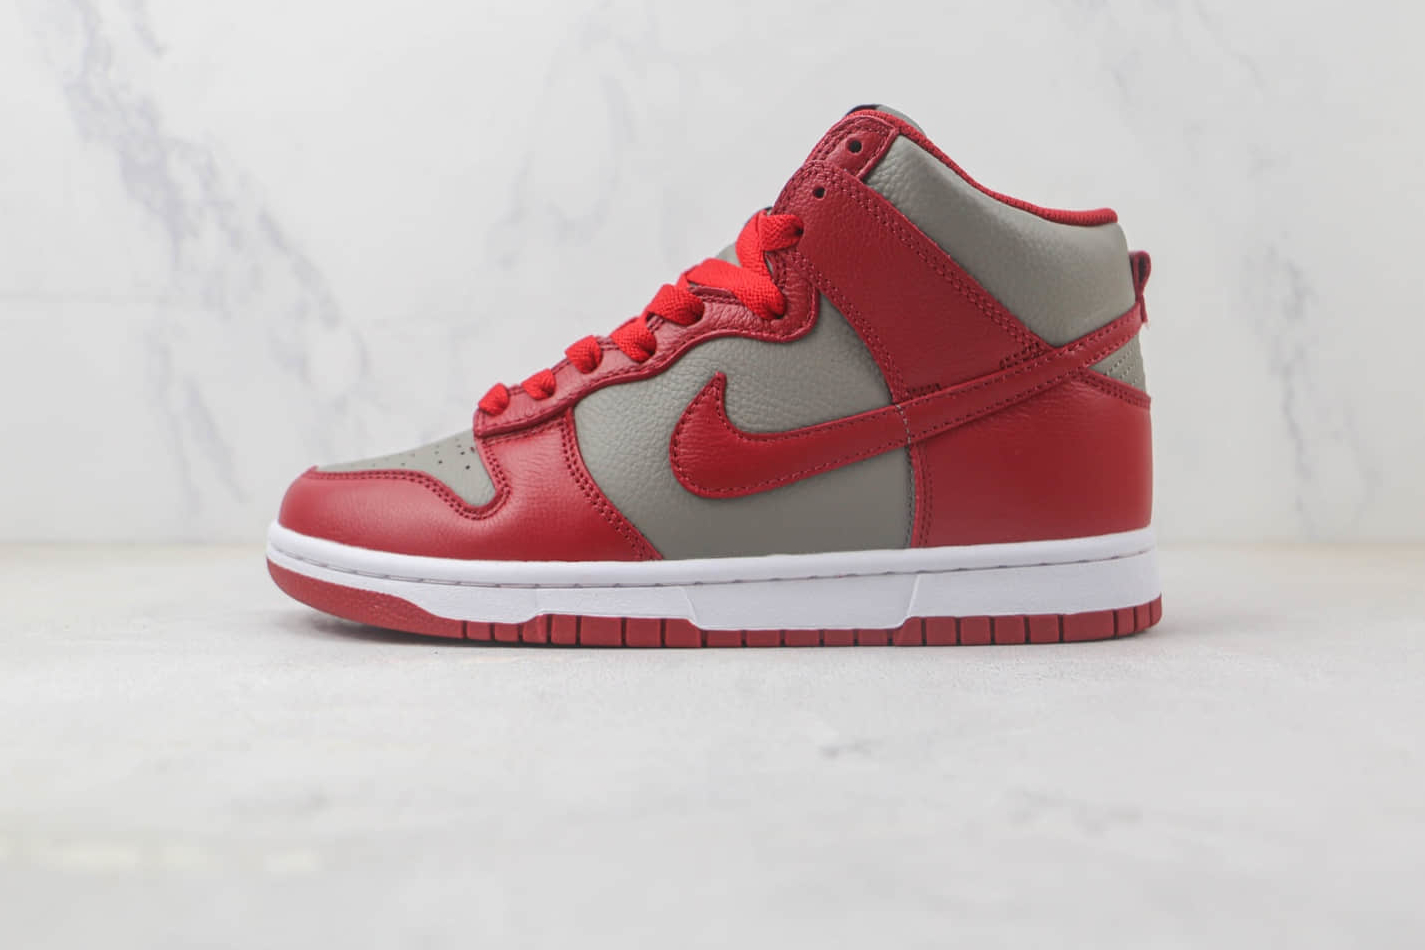 Nike Dunk High 'UNLV' 850477-001 - Classic Basketball Sneakers